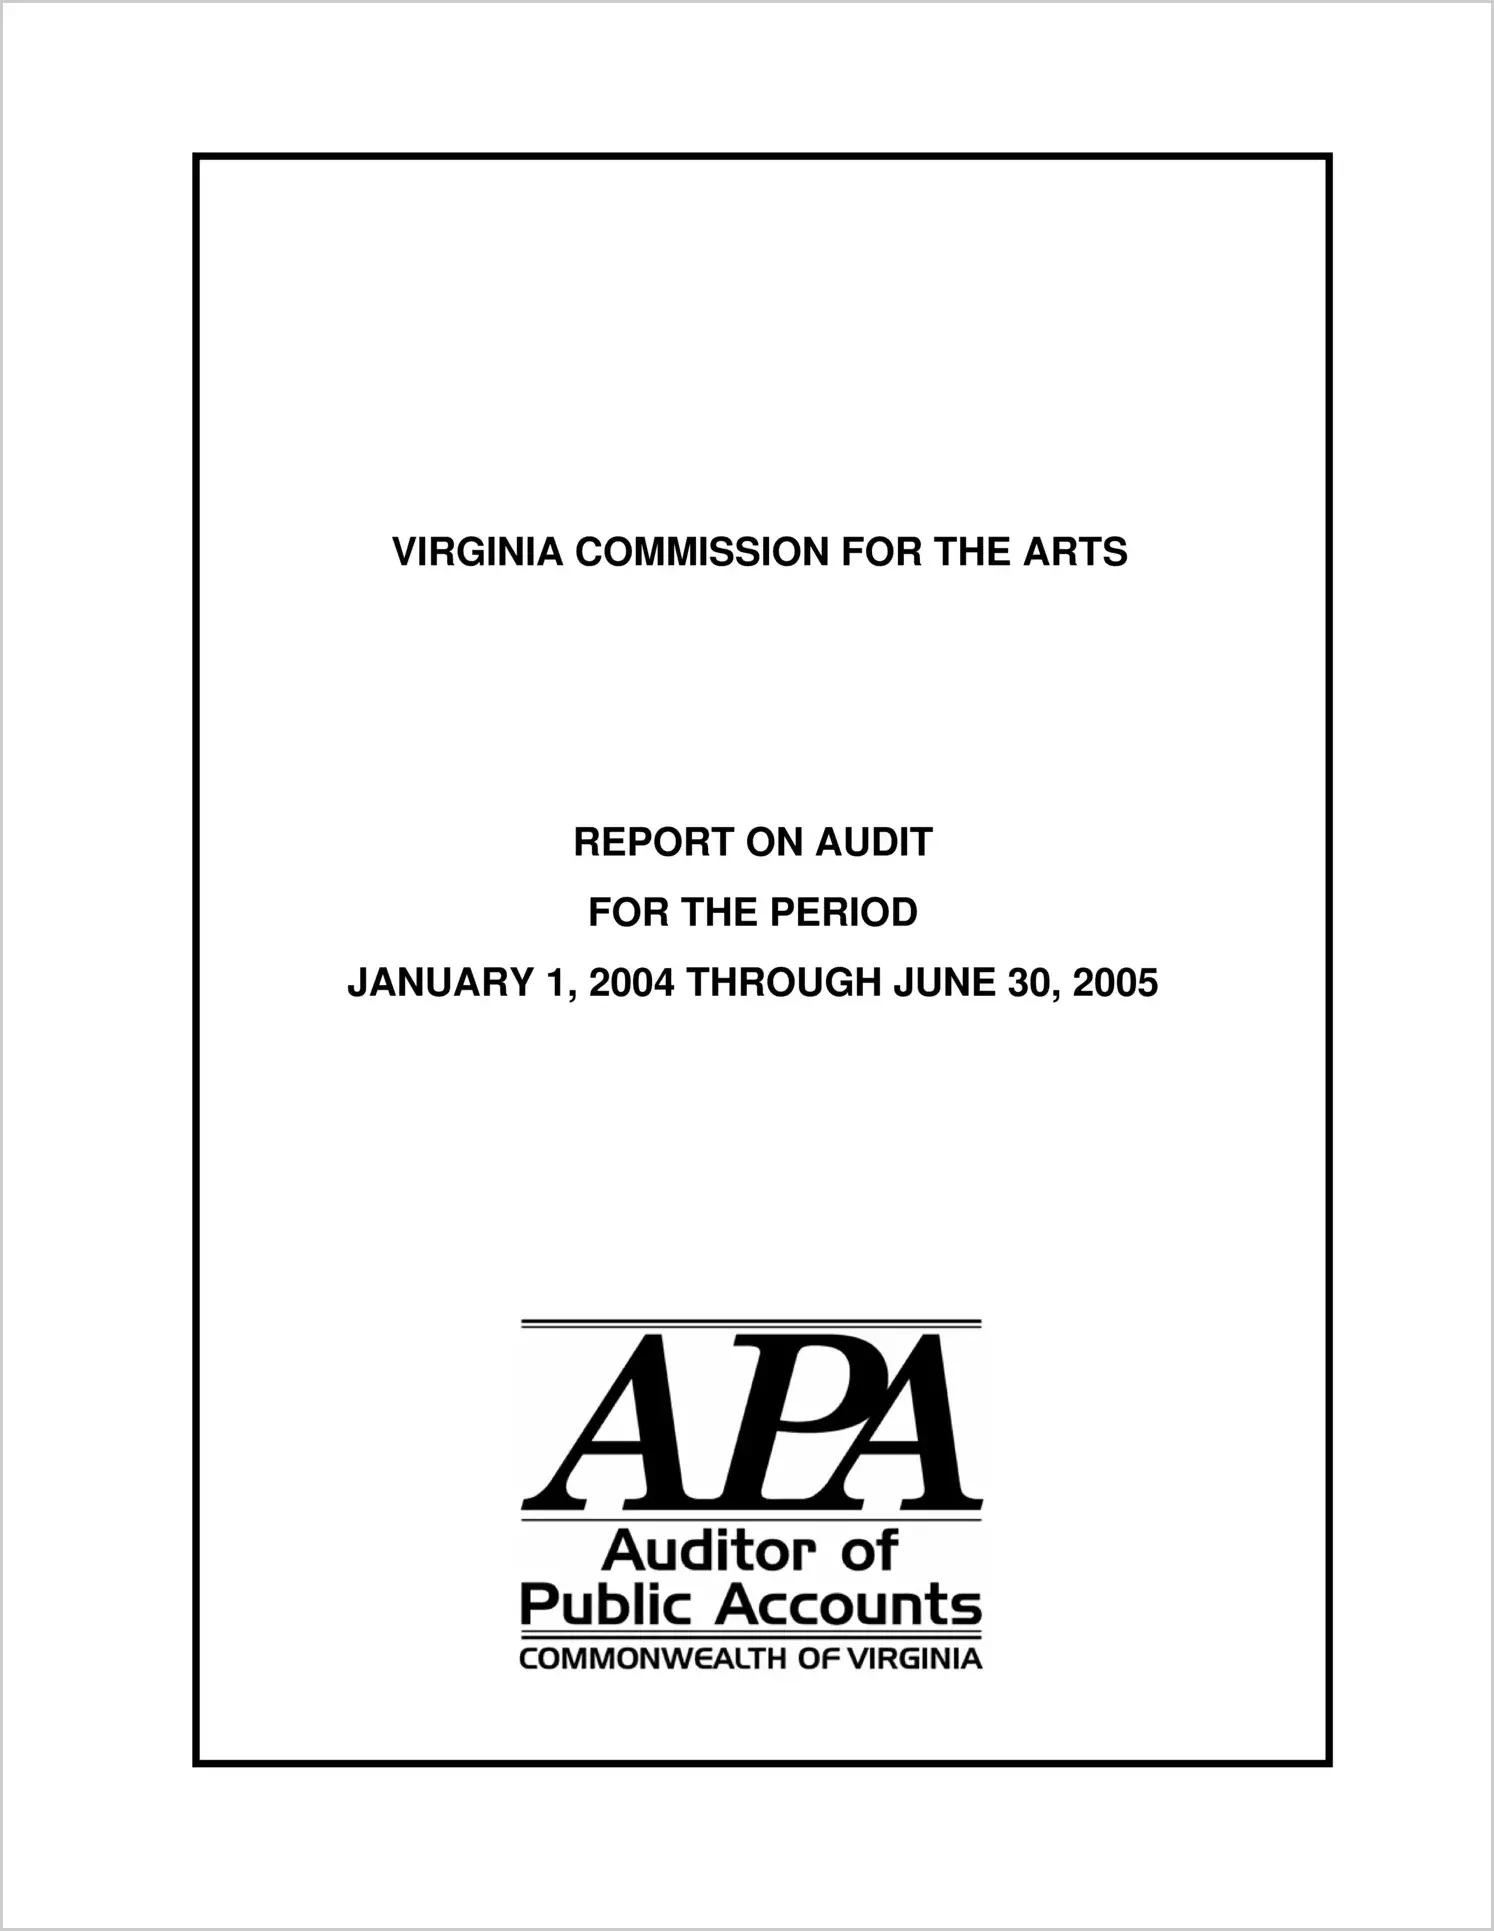 Virginia Commission for the Arts for the period January 1, 2004 through June 30, 2005